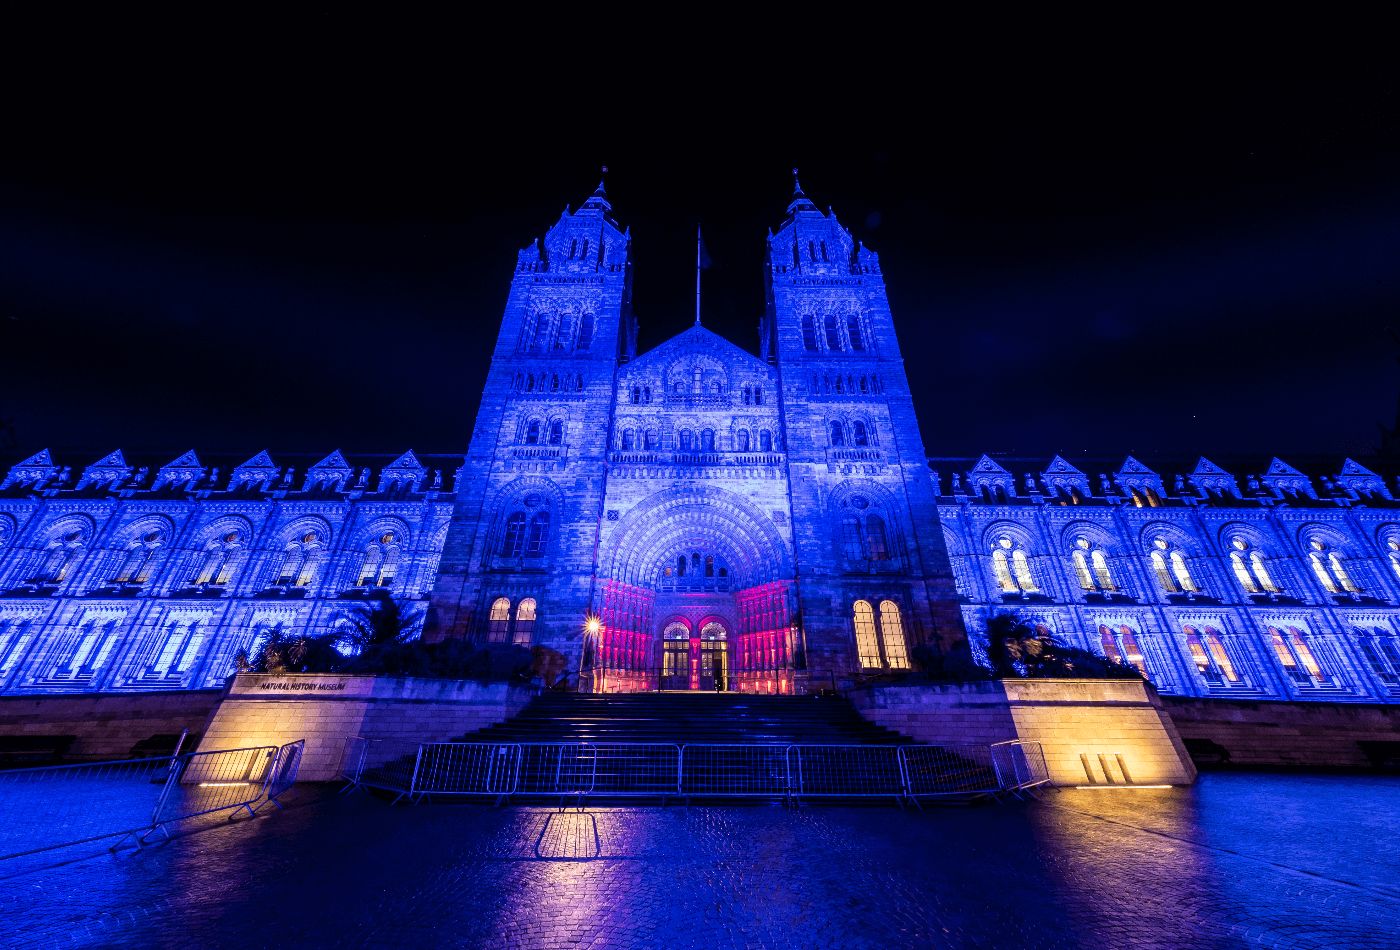 Outdoor shot of natural history museum at night, lit up in blue.jpg